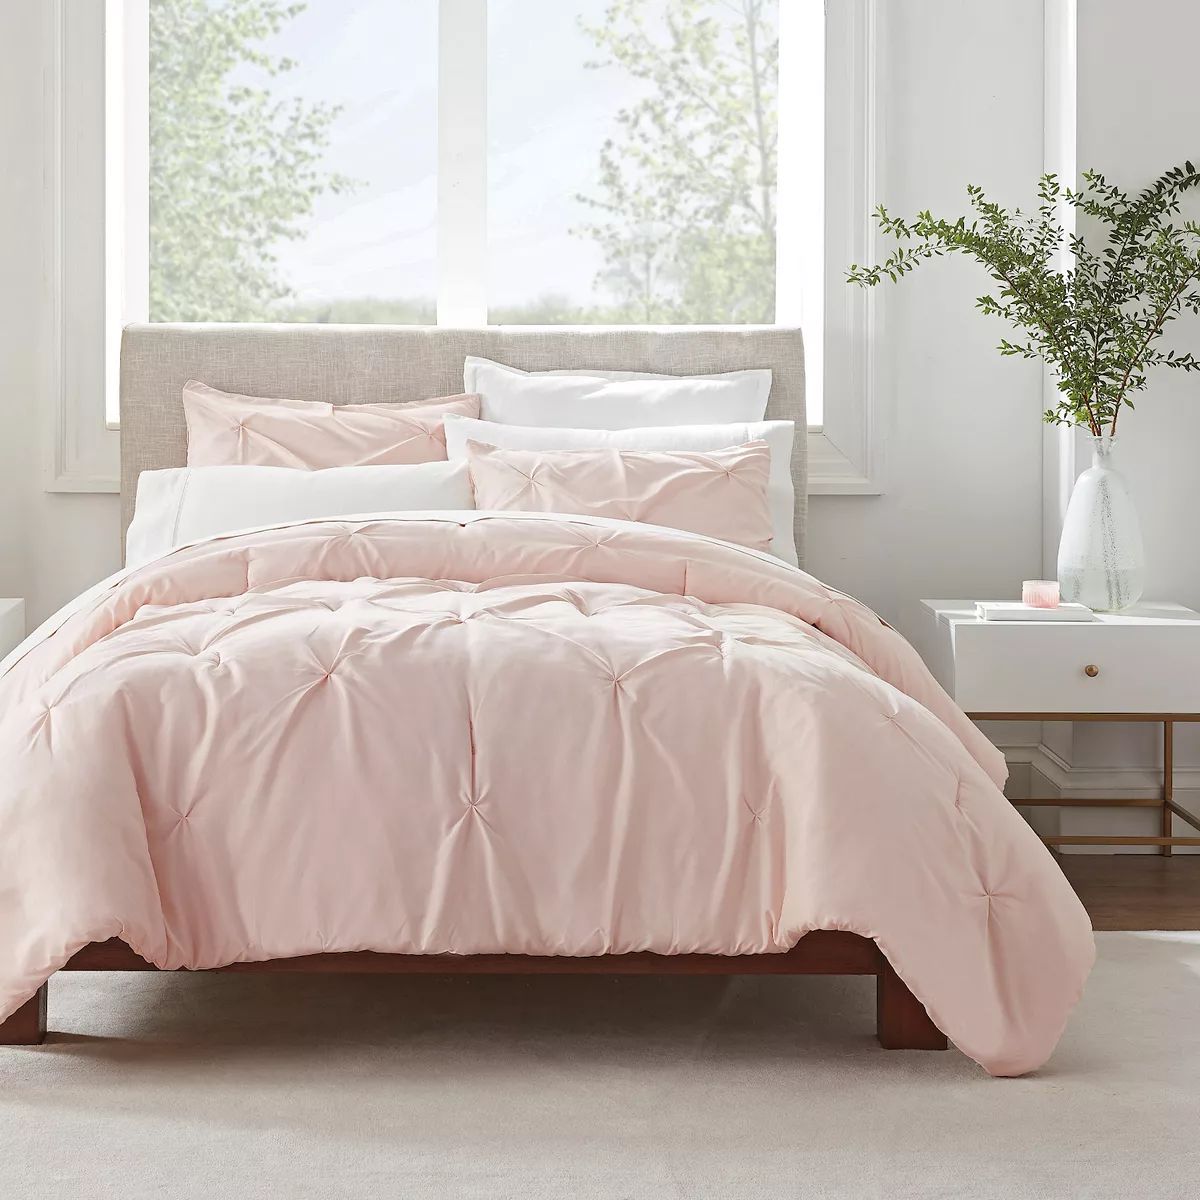 Serta® Simply Clean Antimicrobial Pleated 3-Piece Comforter Set with Shams | Kohl's